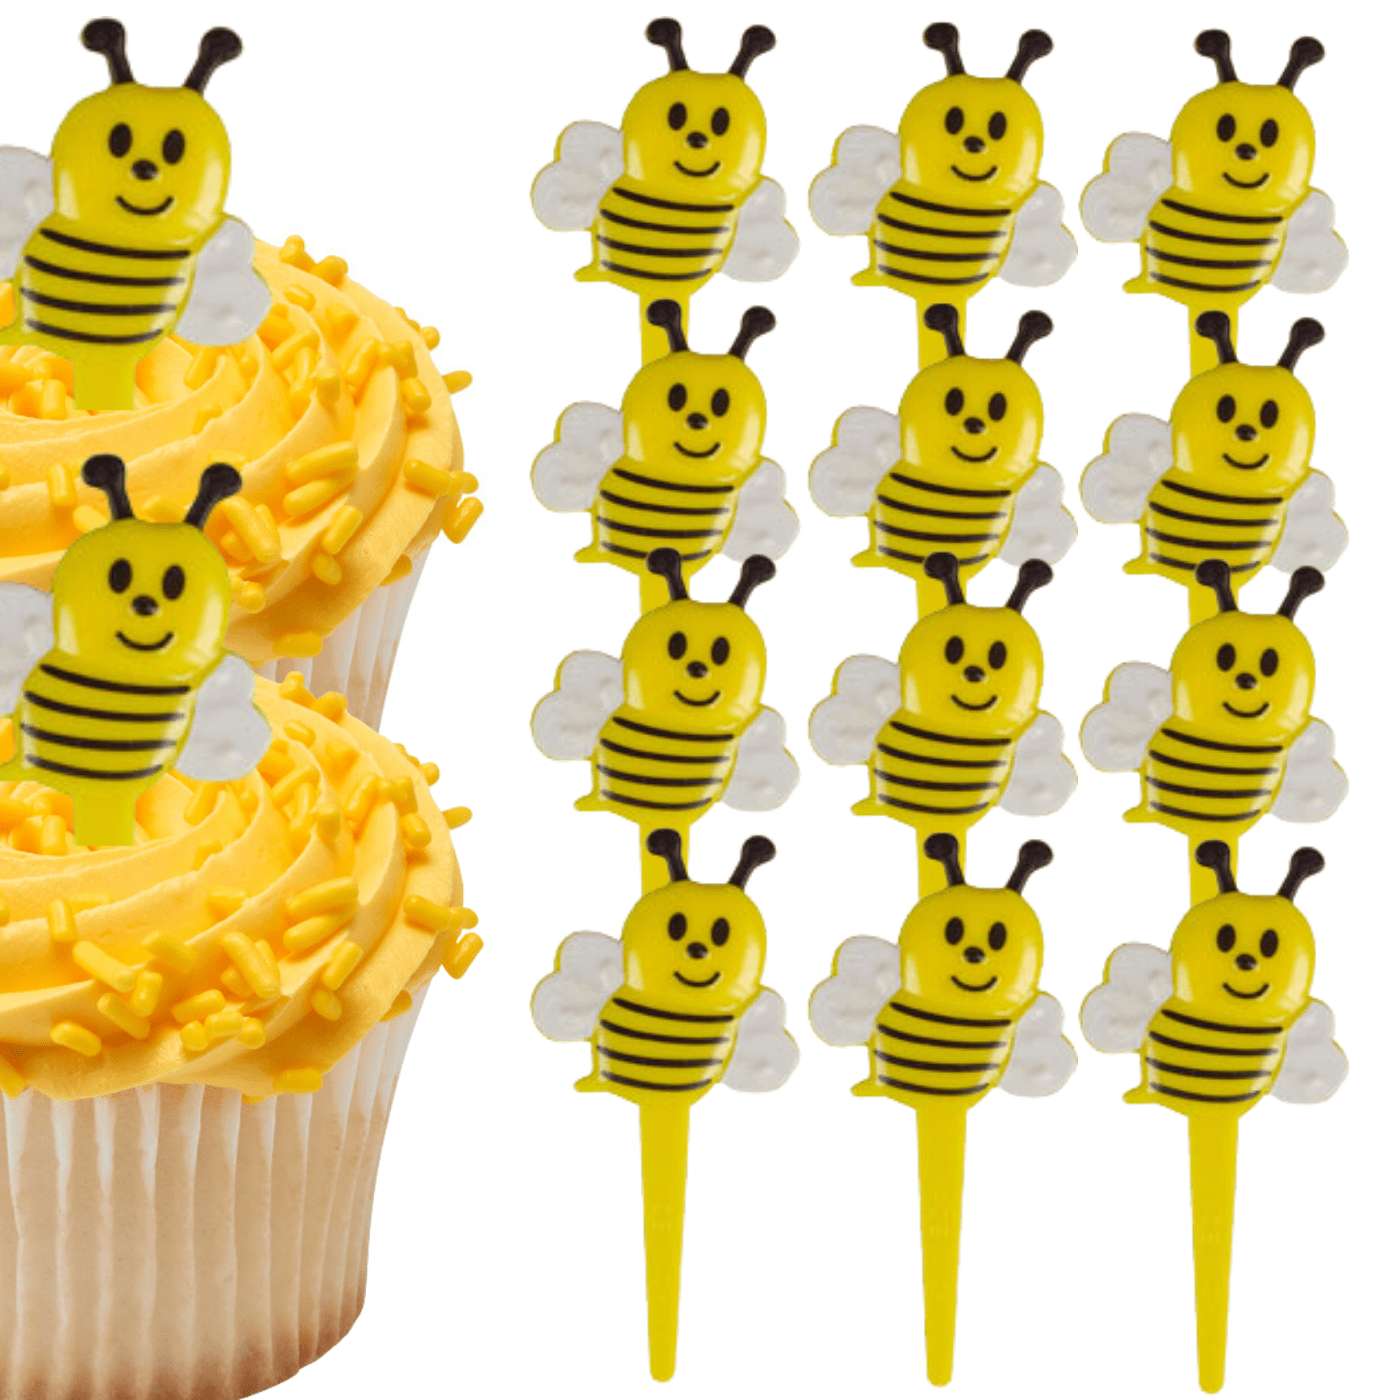 24 Edible Bees Bee Bumblebee Honey Cupcake Toppers on Rice Wafer